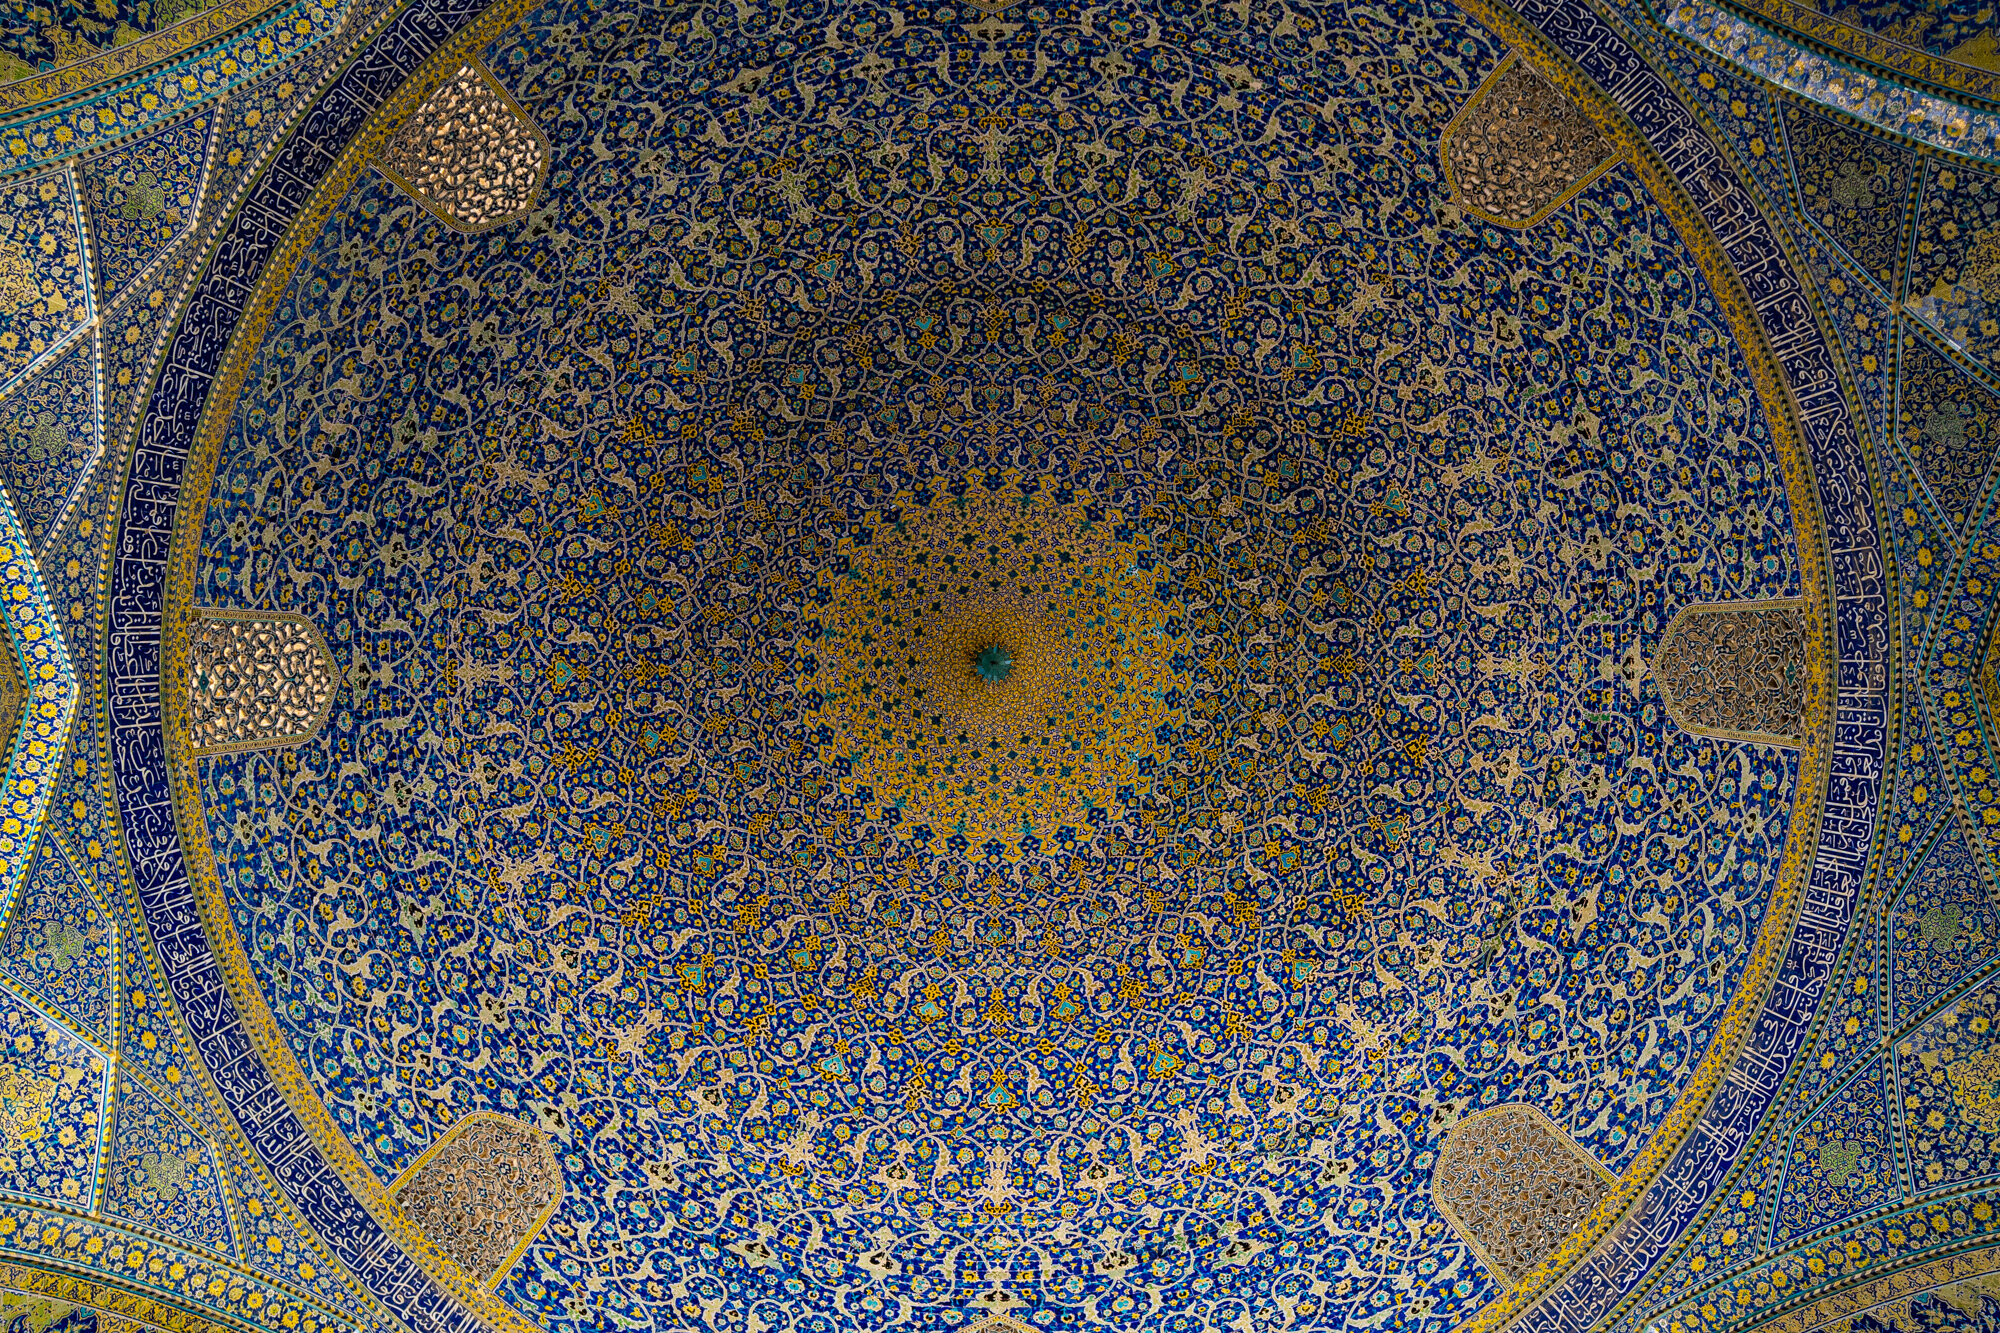  Ceiling details from the Shah Mosque, Isfahan 